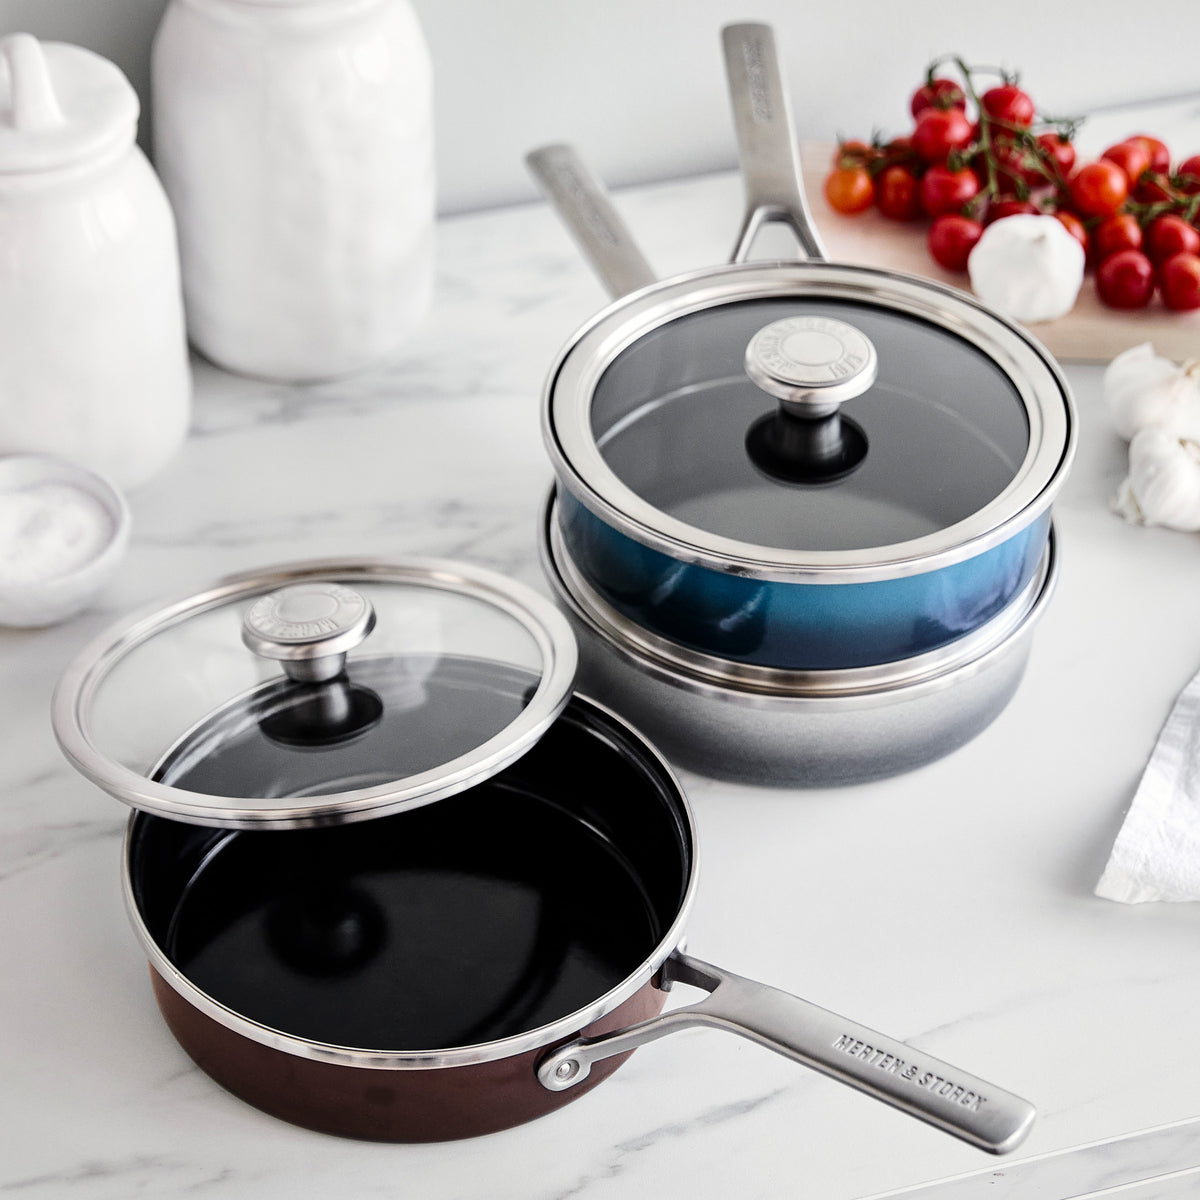 Upgrade your entire cookware set with enameled cast iron for $100